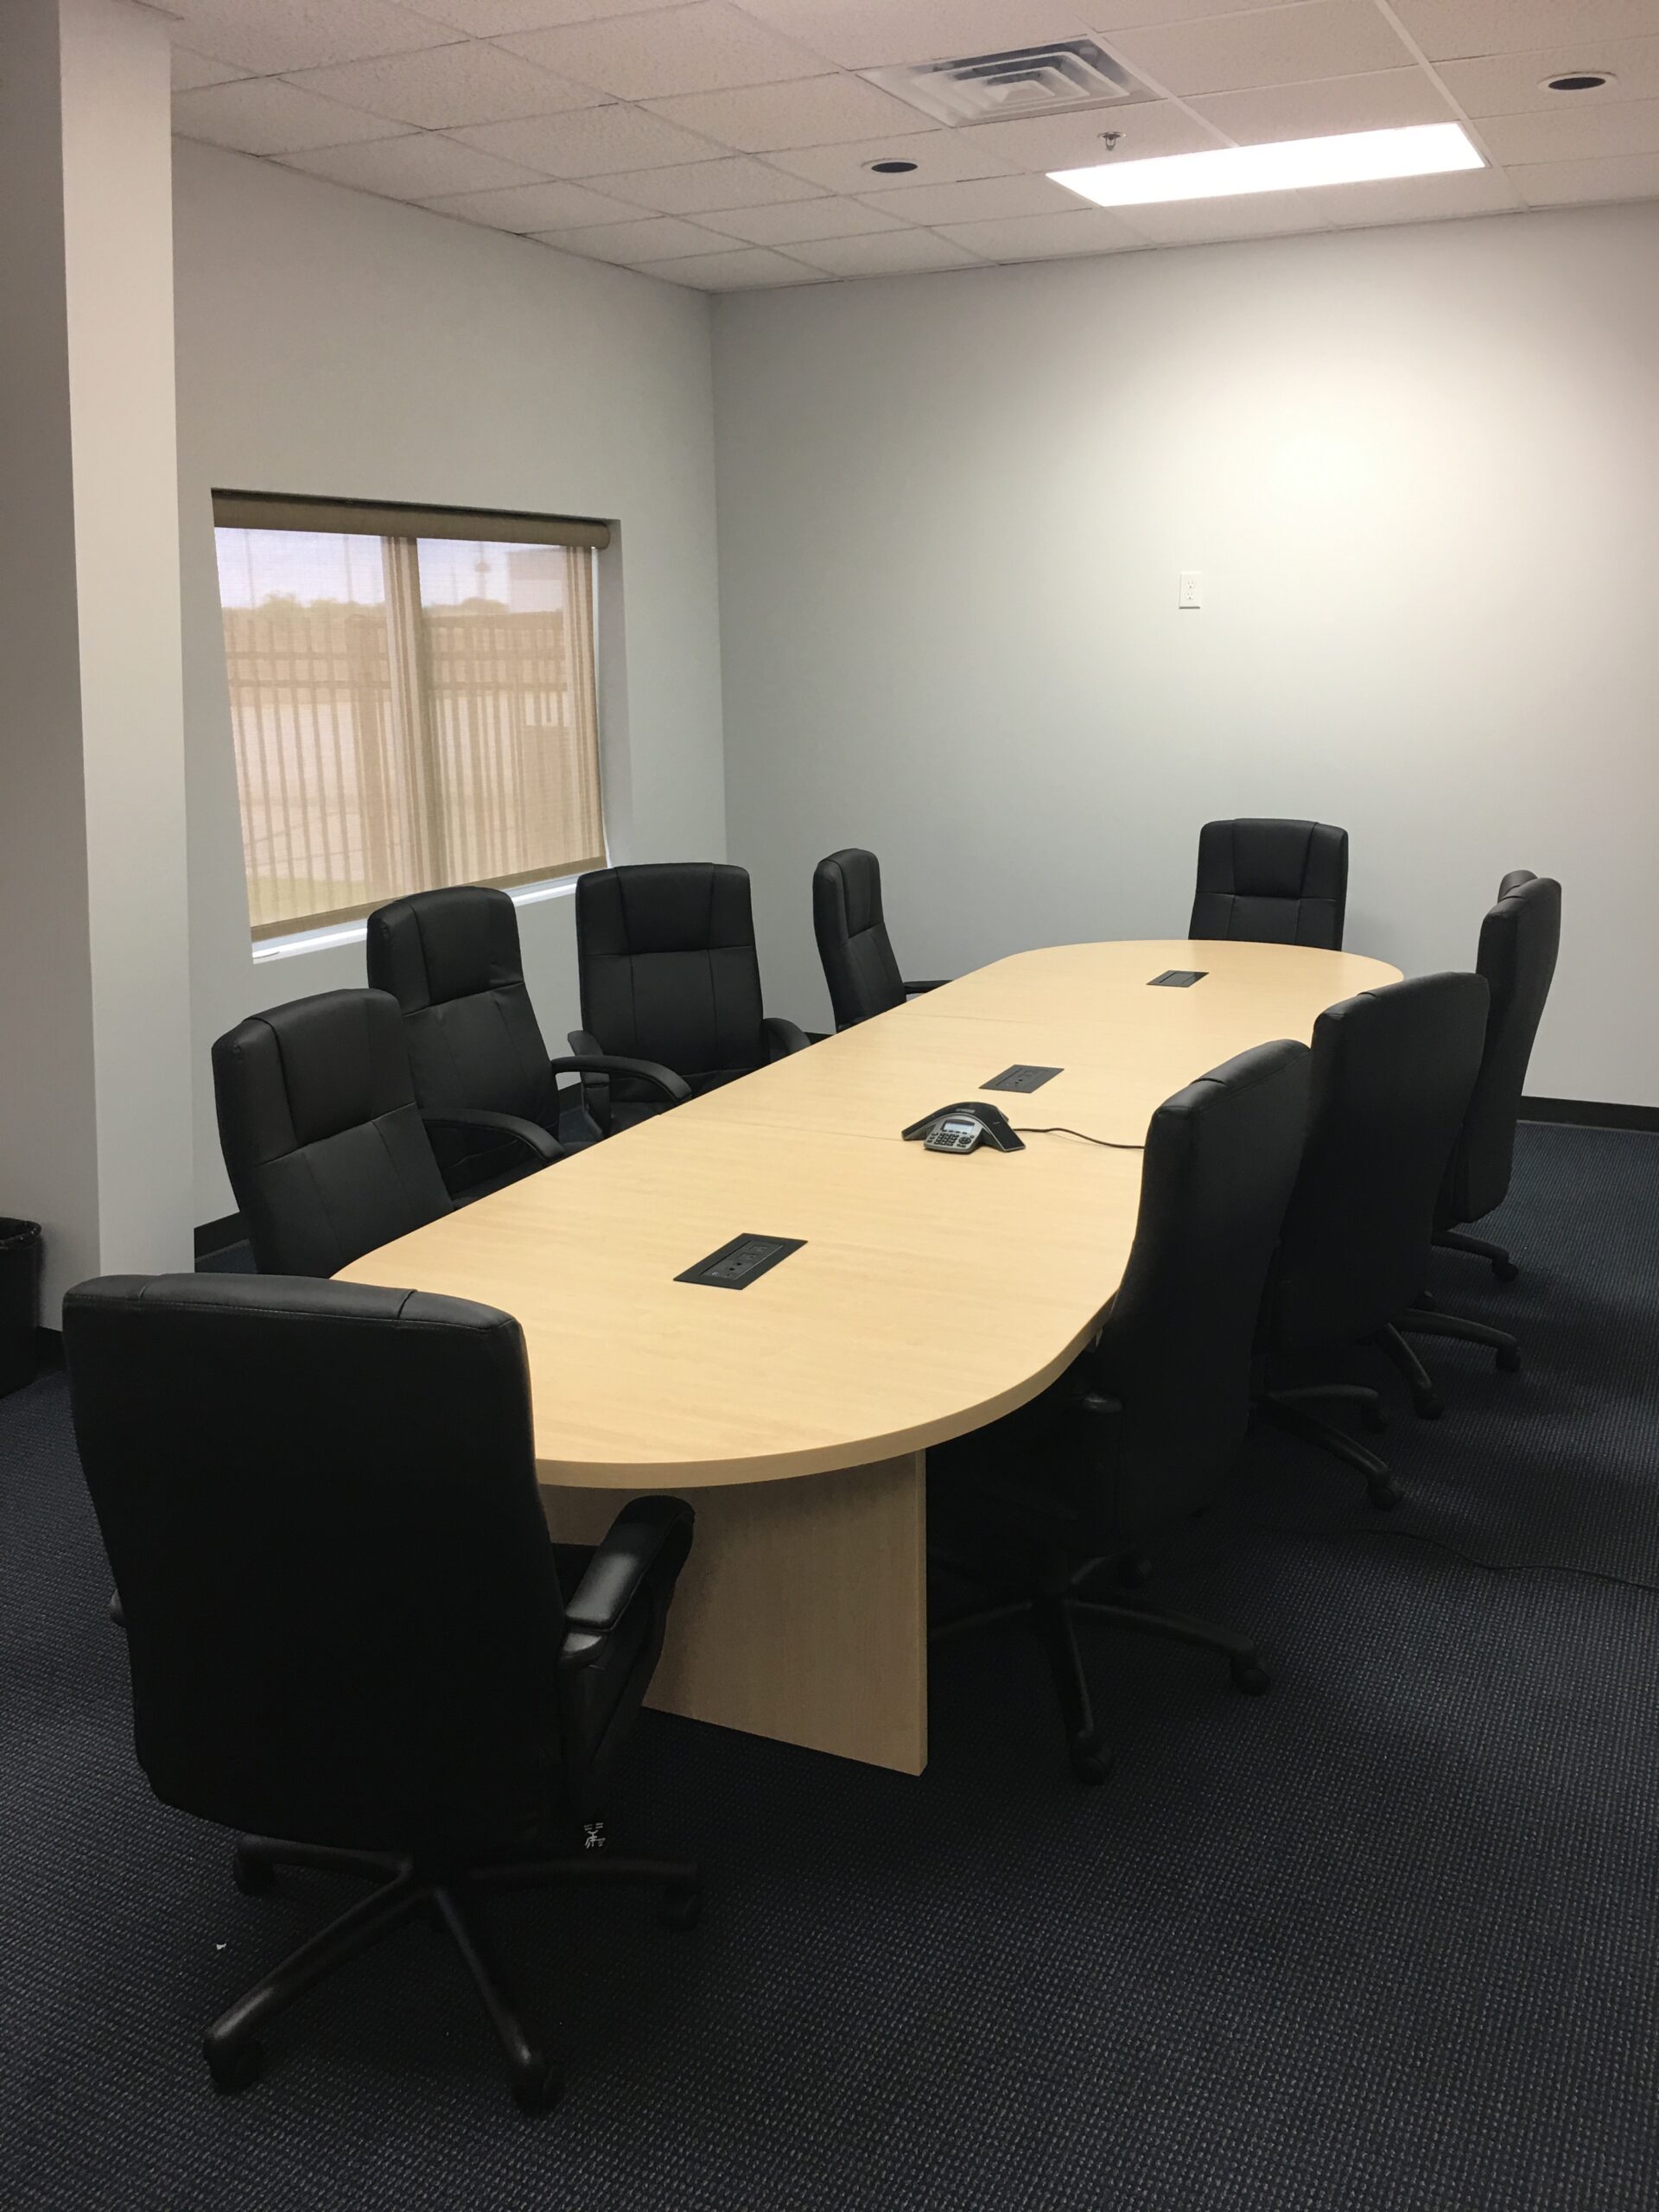 Blonde Conference Table with Black Chairs